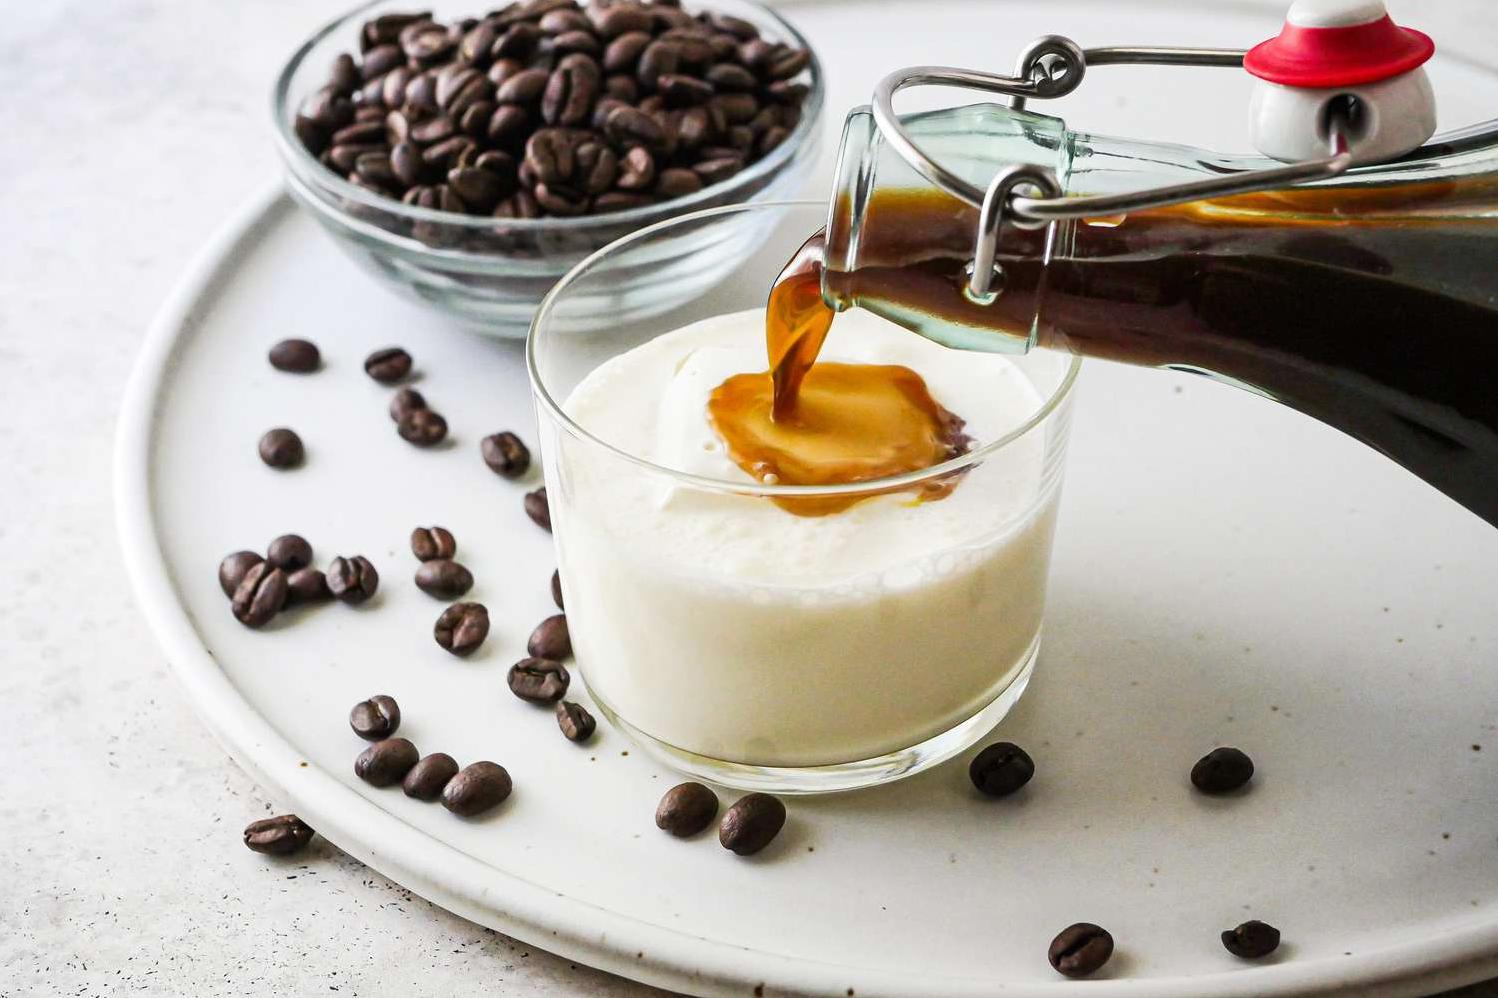  Treat yourself with a homemade Vanilla-Coffee Liqueur that's better than store-bought.